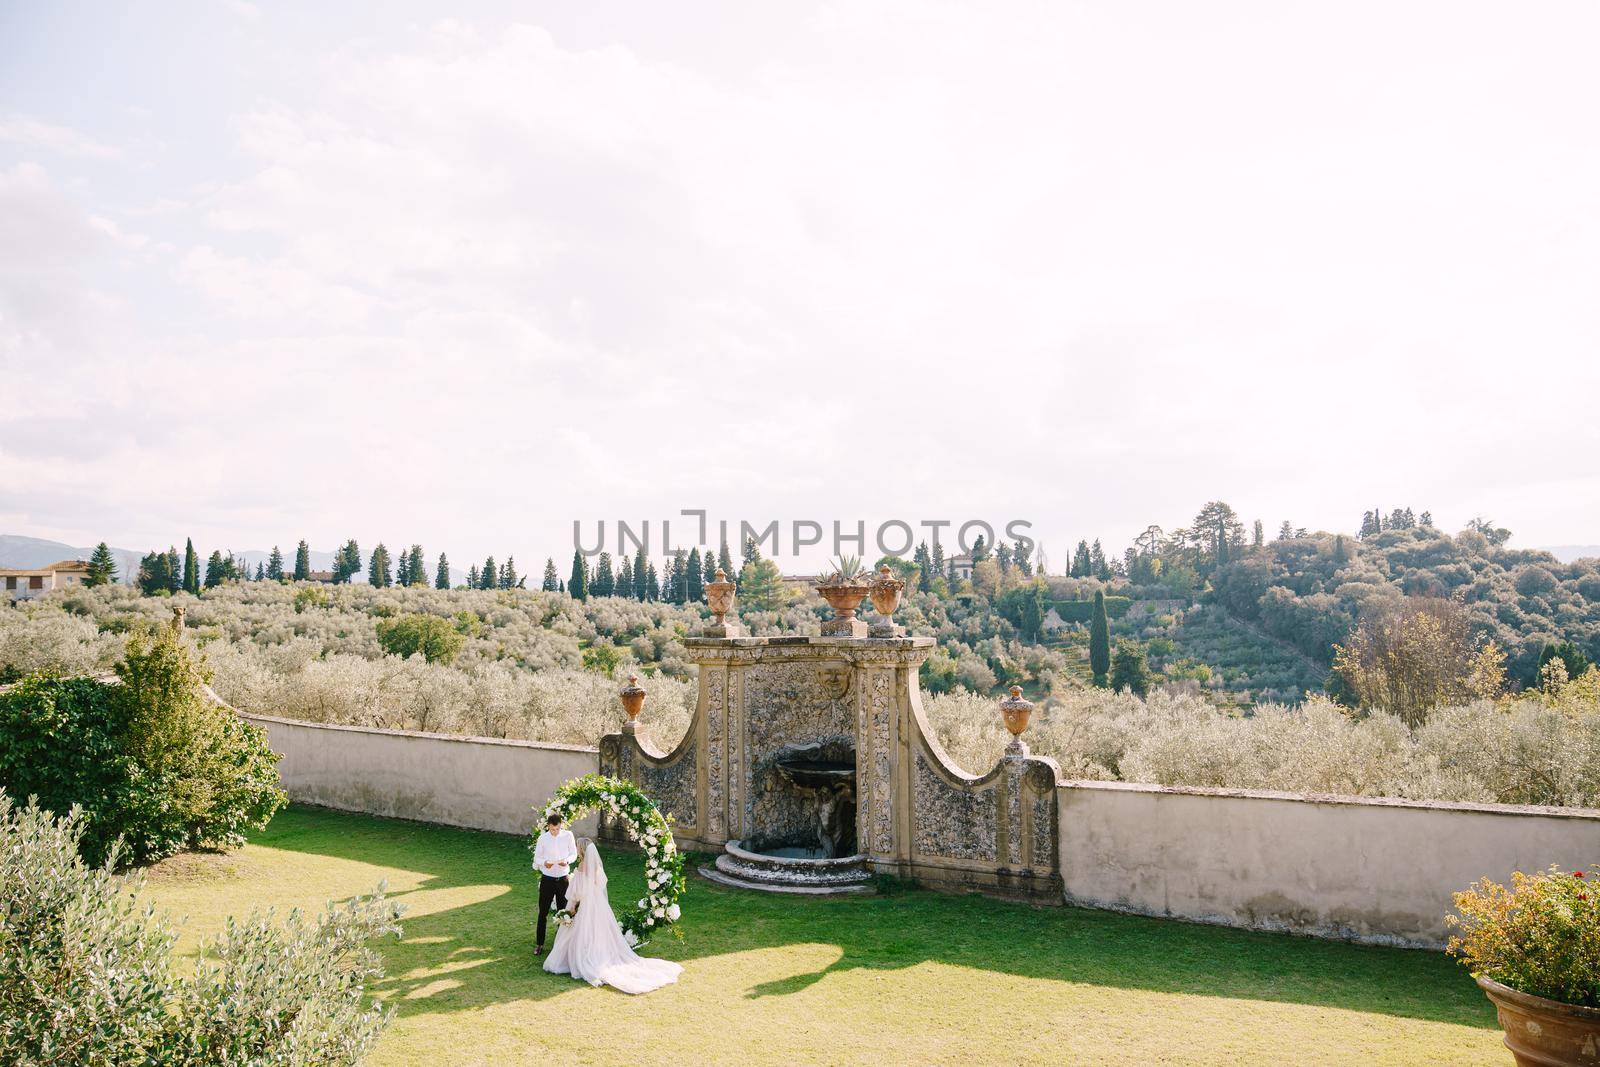 Wedding at an old winery villa in Tuscany, Italy. Wedding couple under a round arch of flowers. The groom reads wedding vows. by Nadtochiy